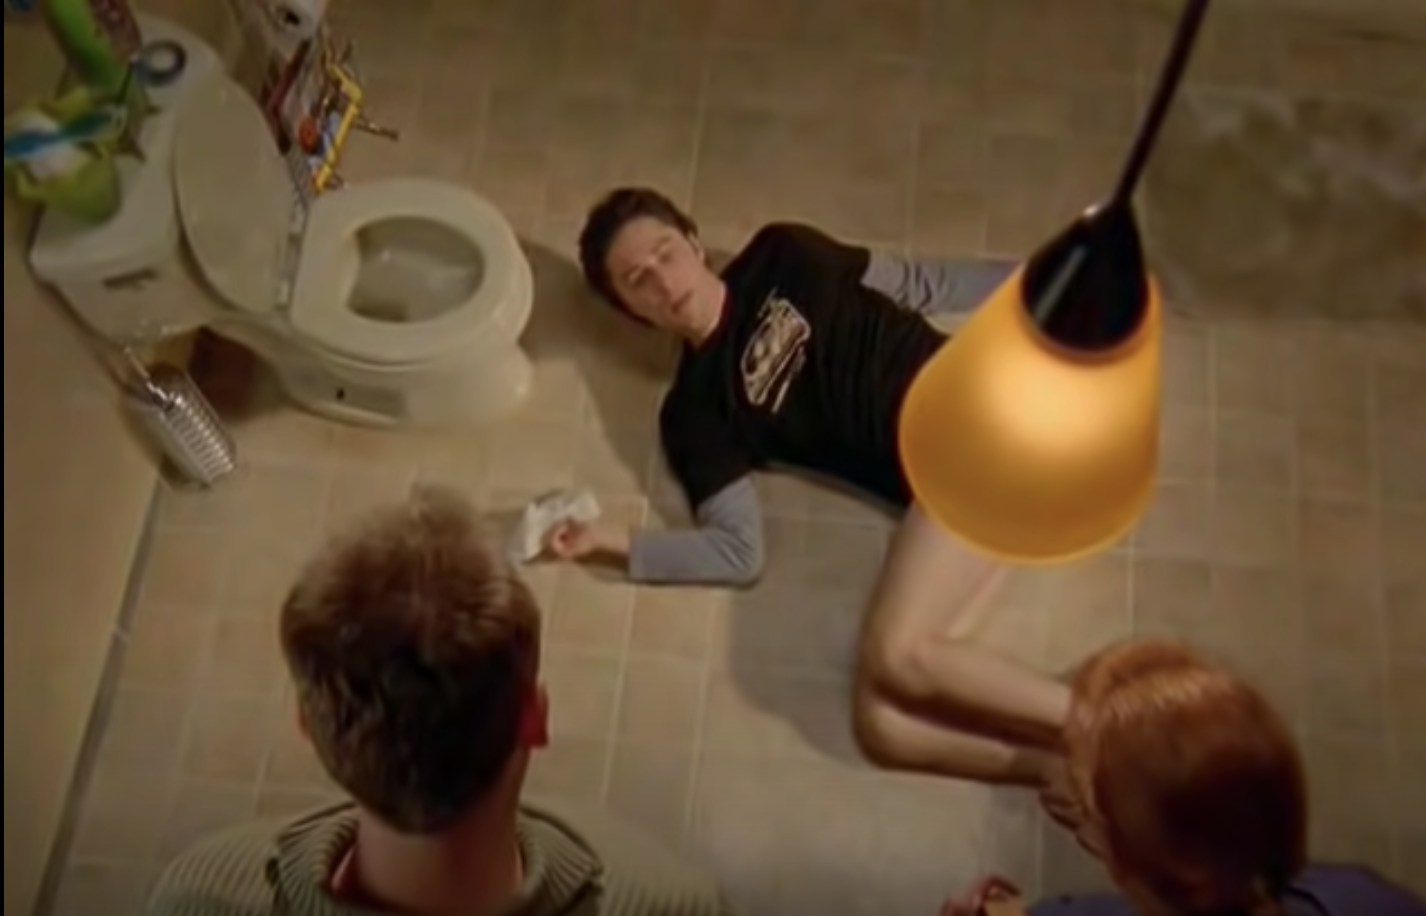 Zach Braff as JD from &quot;Scubs&quot; with his trousers down passed out next to the toilet